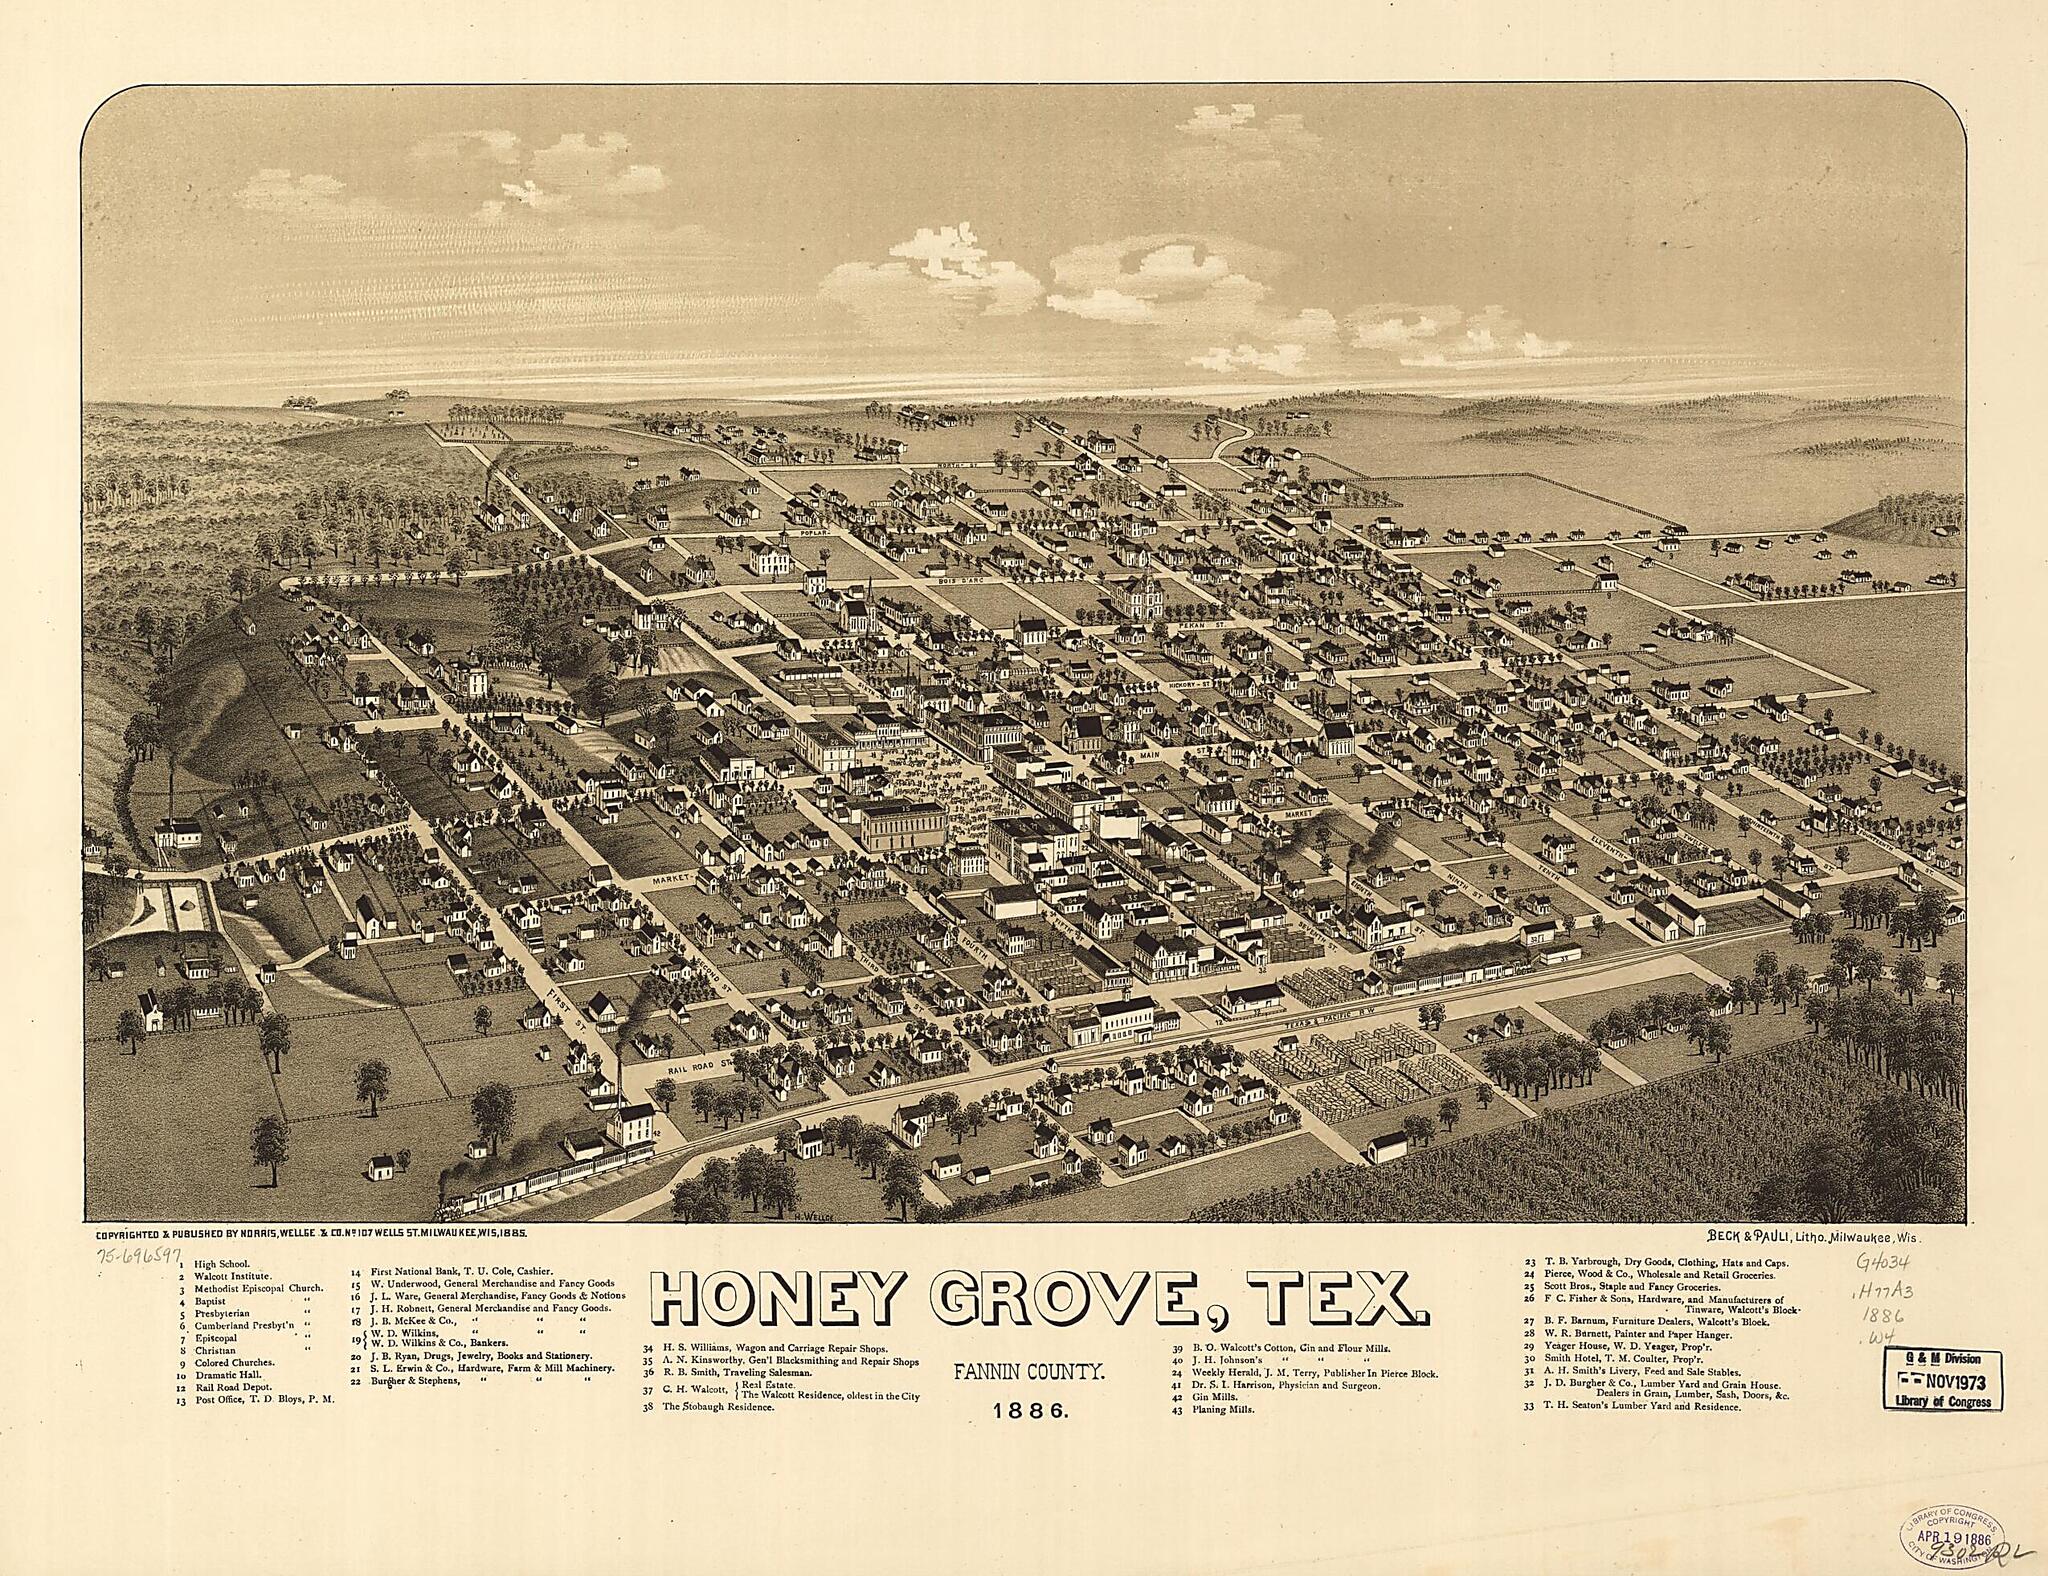 This old map of Honey Grove, Texas Fannin County from 1886 was created by  Beck &amp; Pauli, Wellge &amp; Co Norris, H. (Henry) Wellge in 1886